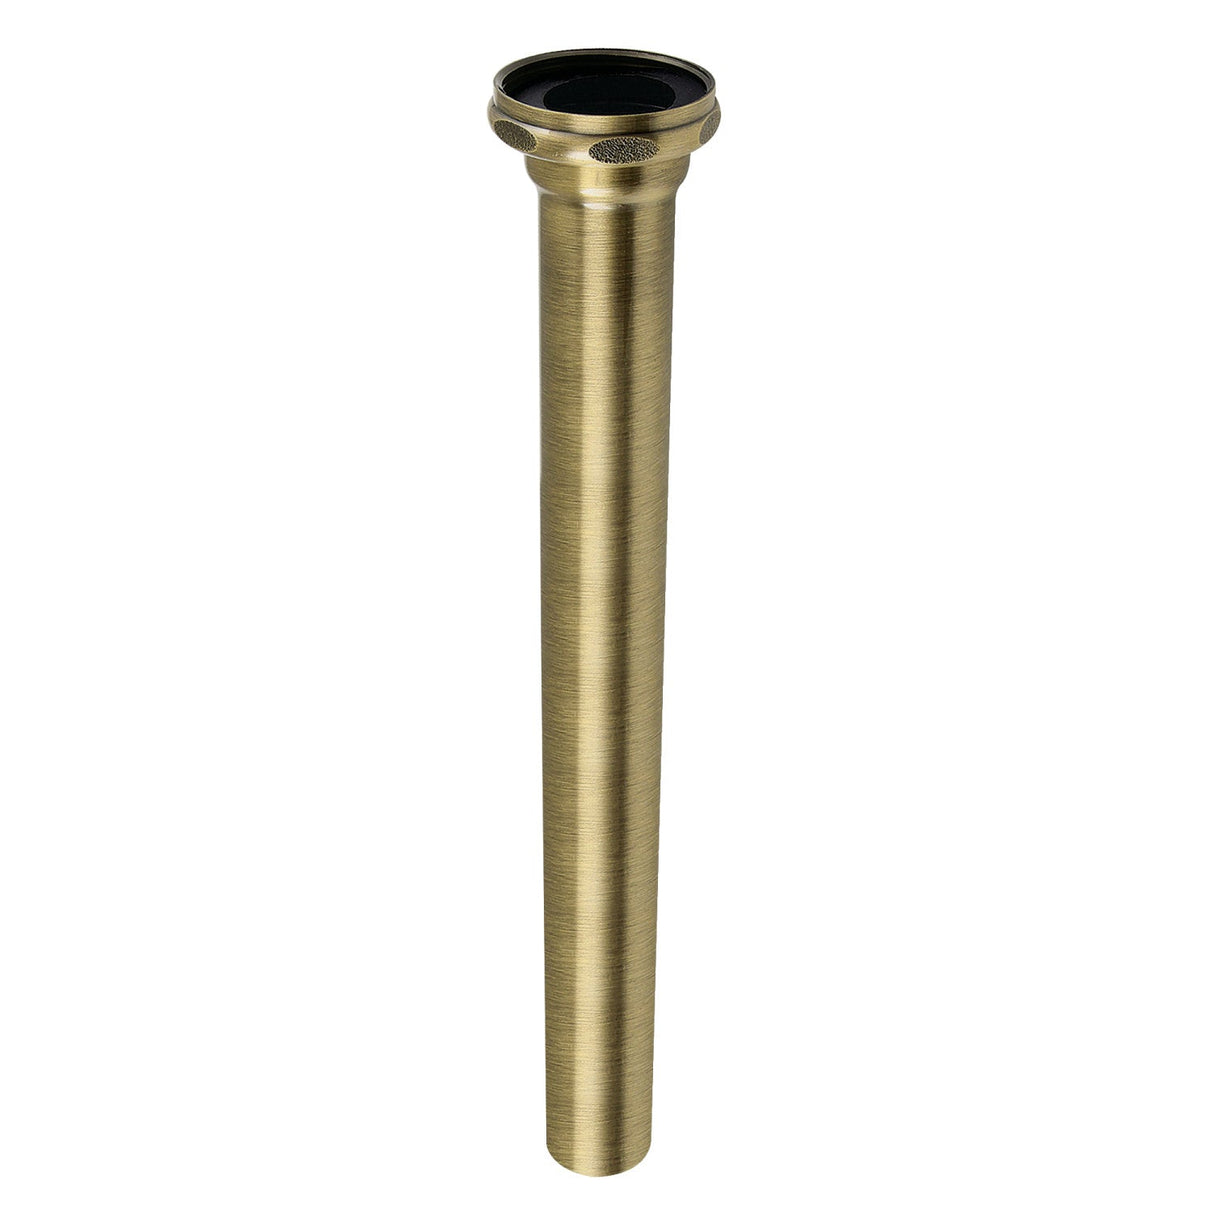 Possibility EVT12123 1-1/2" to 1-1/4" Step-Down Tailpiece, 12" Length, Antique Brass